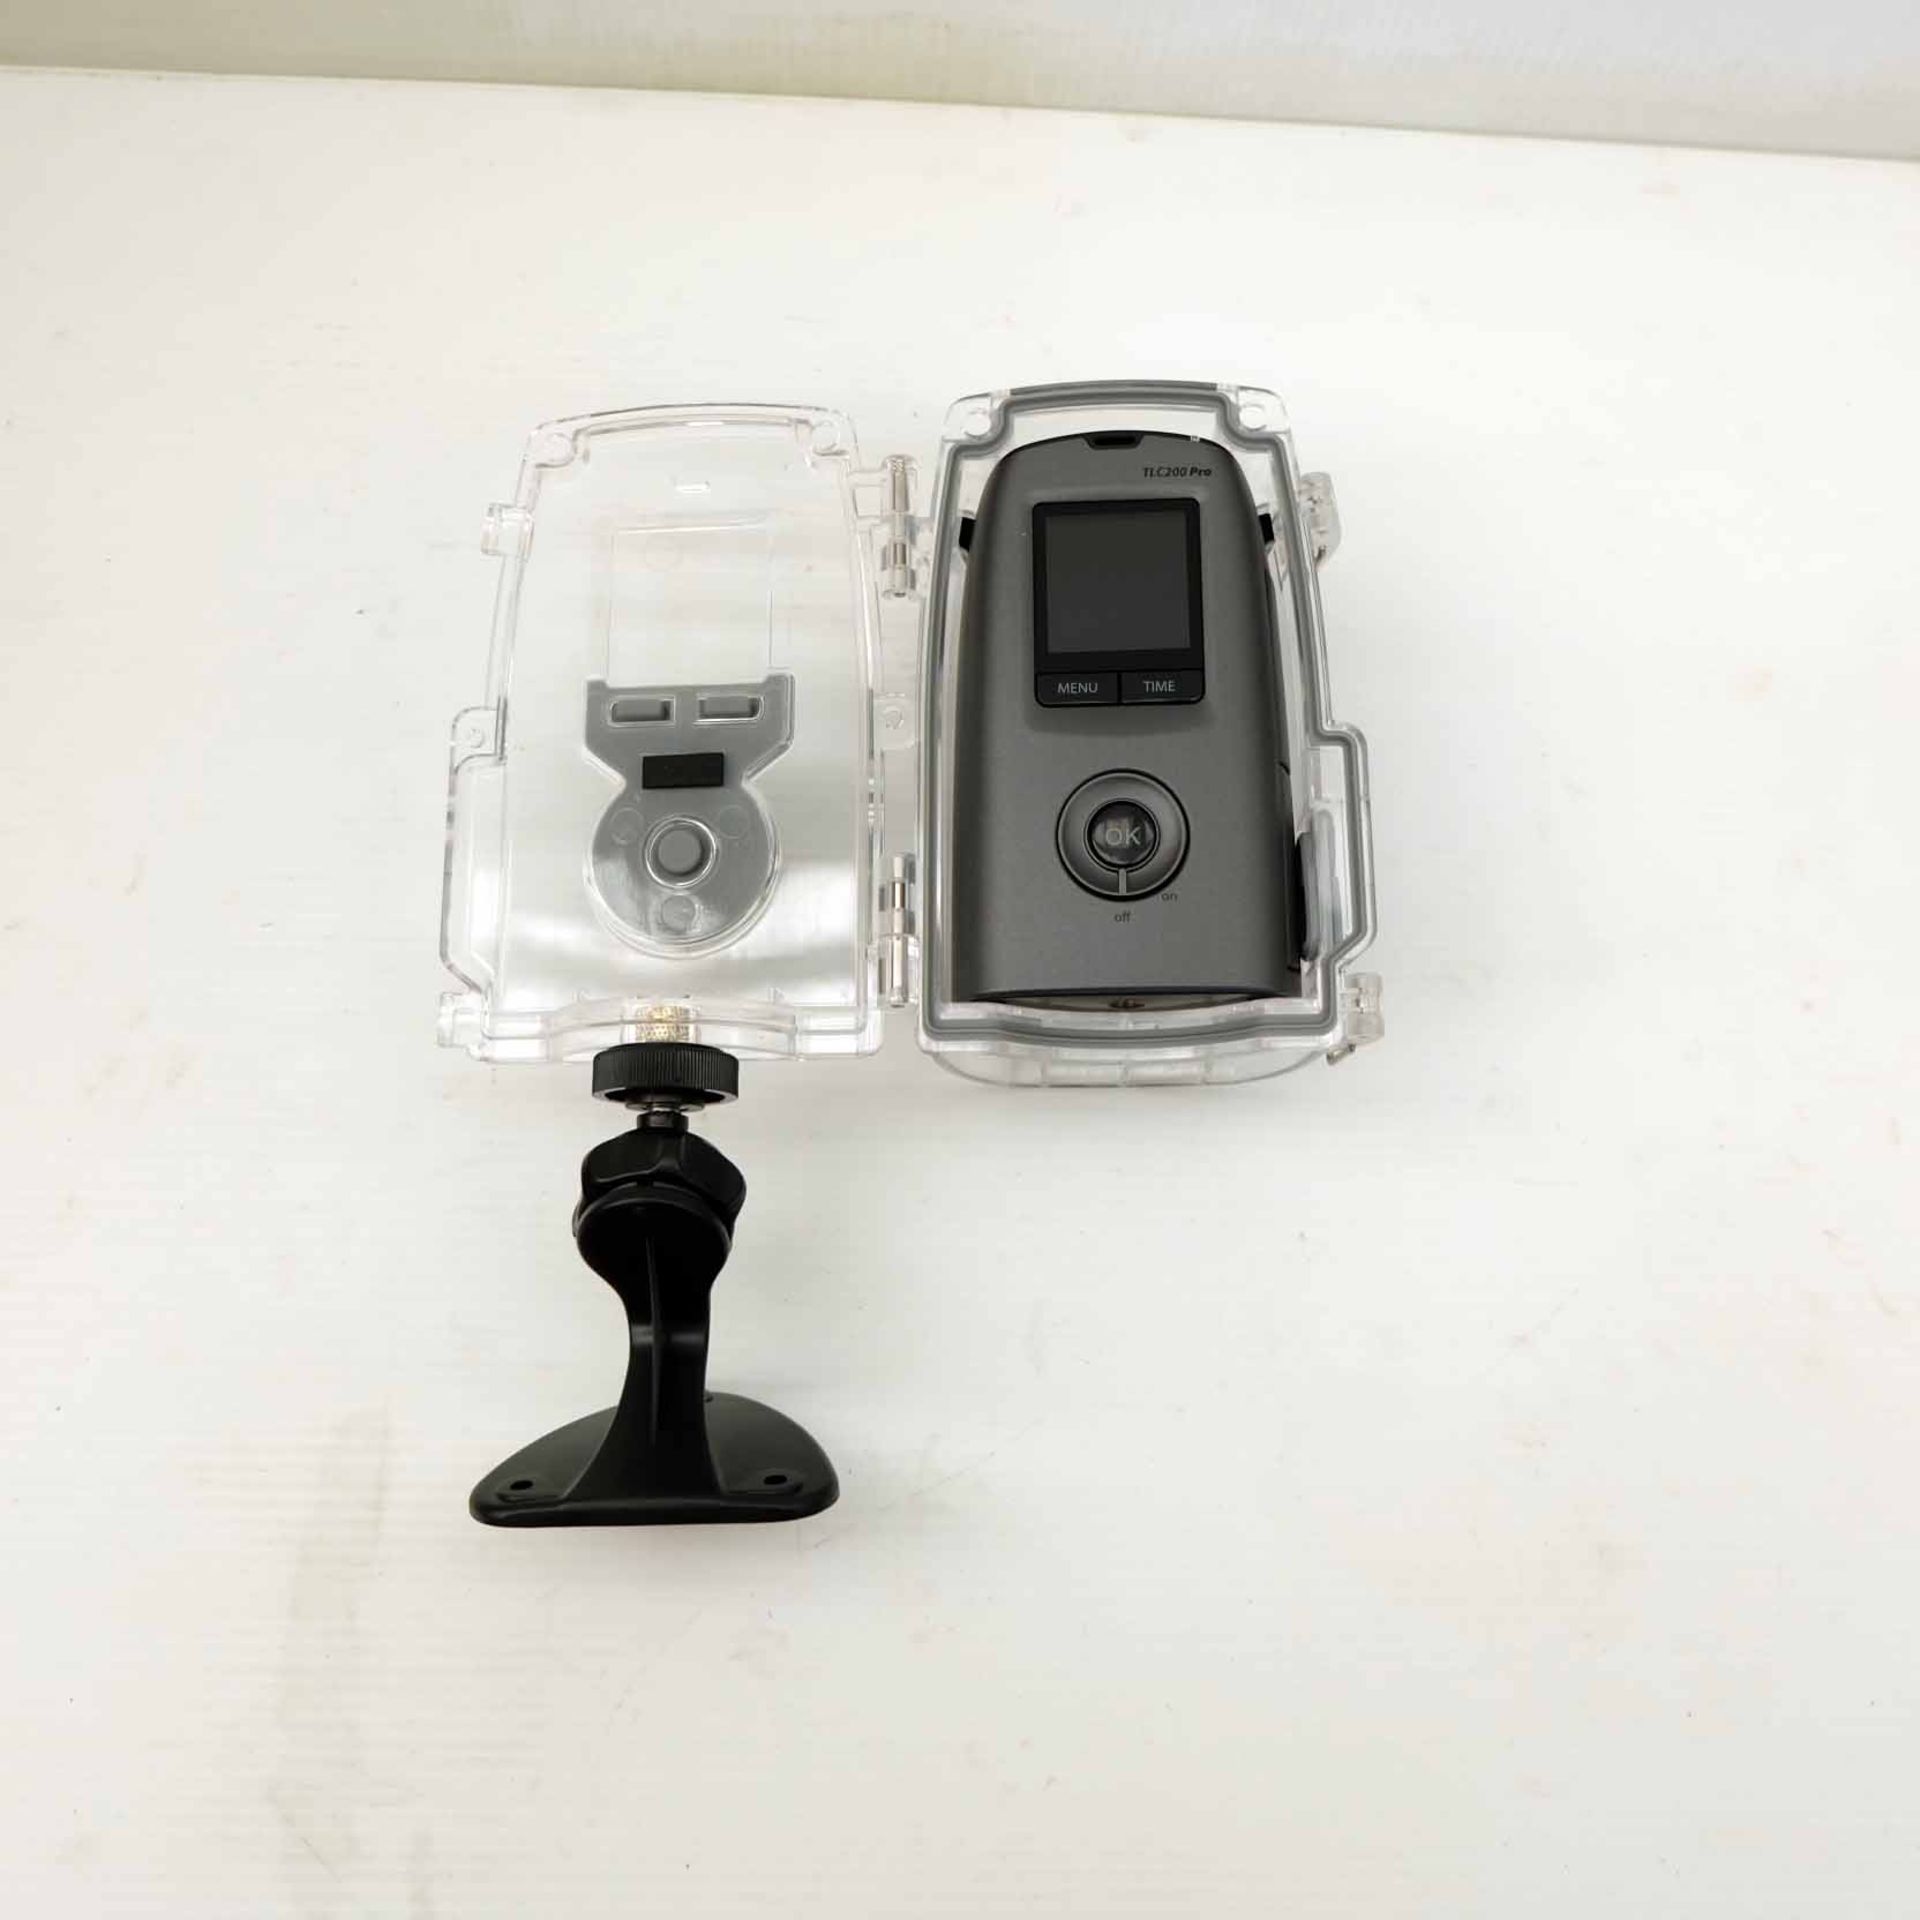 Brinno TLC200Pro Time Lapse Camera. In Waterproof Protective Case. Battery Operated. - Image 3 of 7